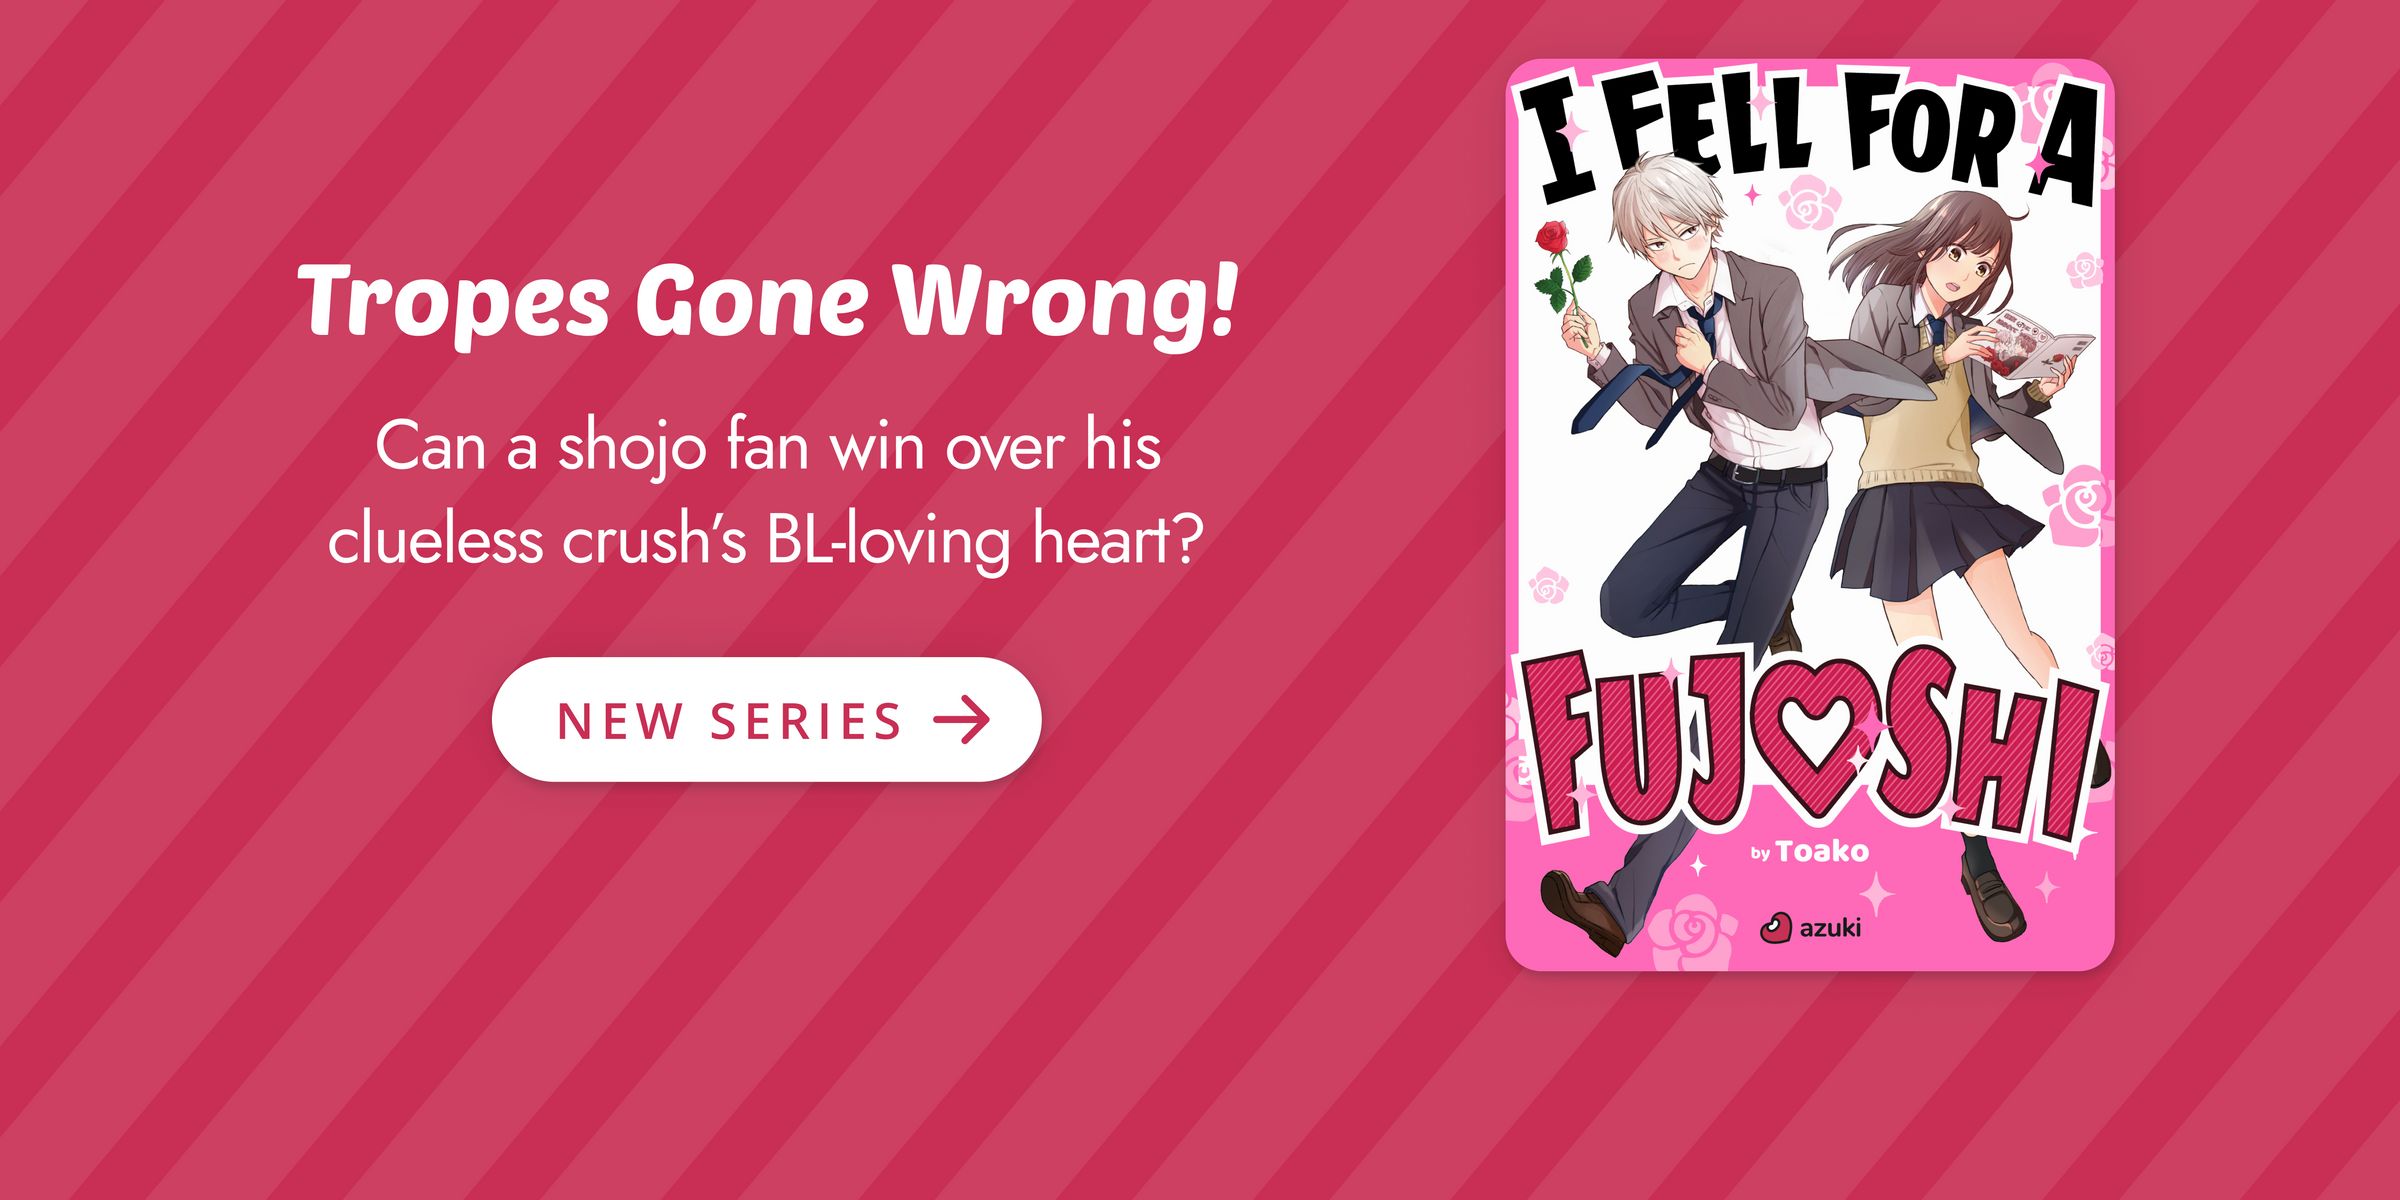 Tropes Gone Wrong! Can a shojo fan win over his clueless crush’s BL-loving heart? New series. I Fell for a Fujoshi by Toako.